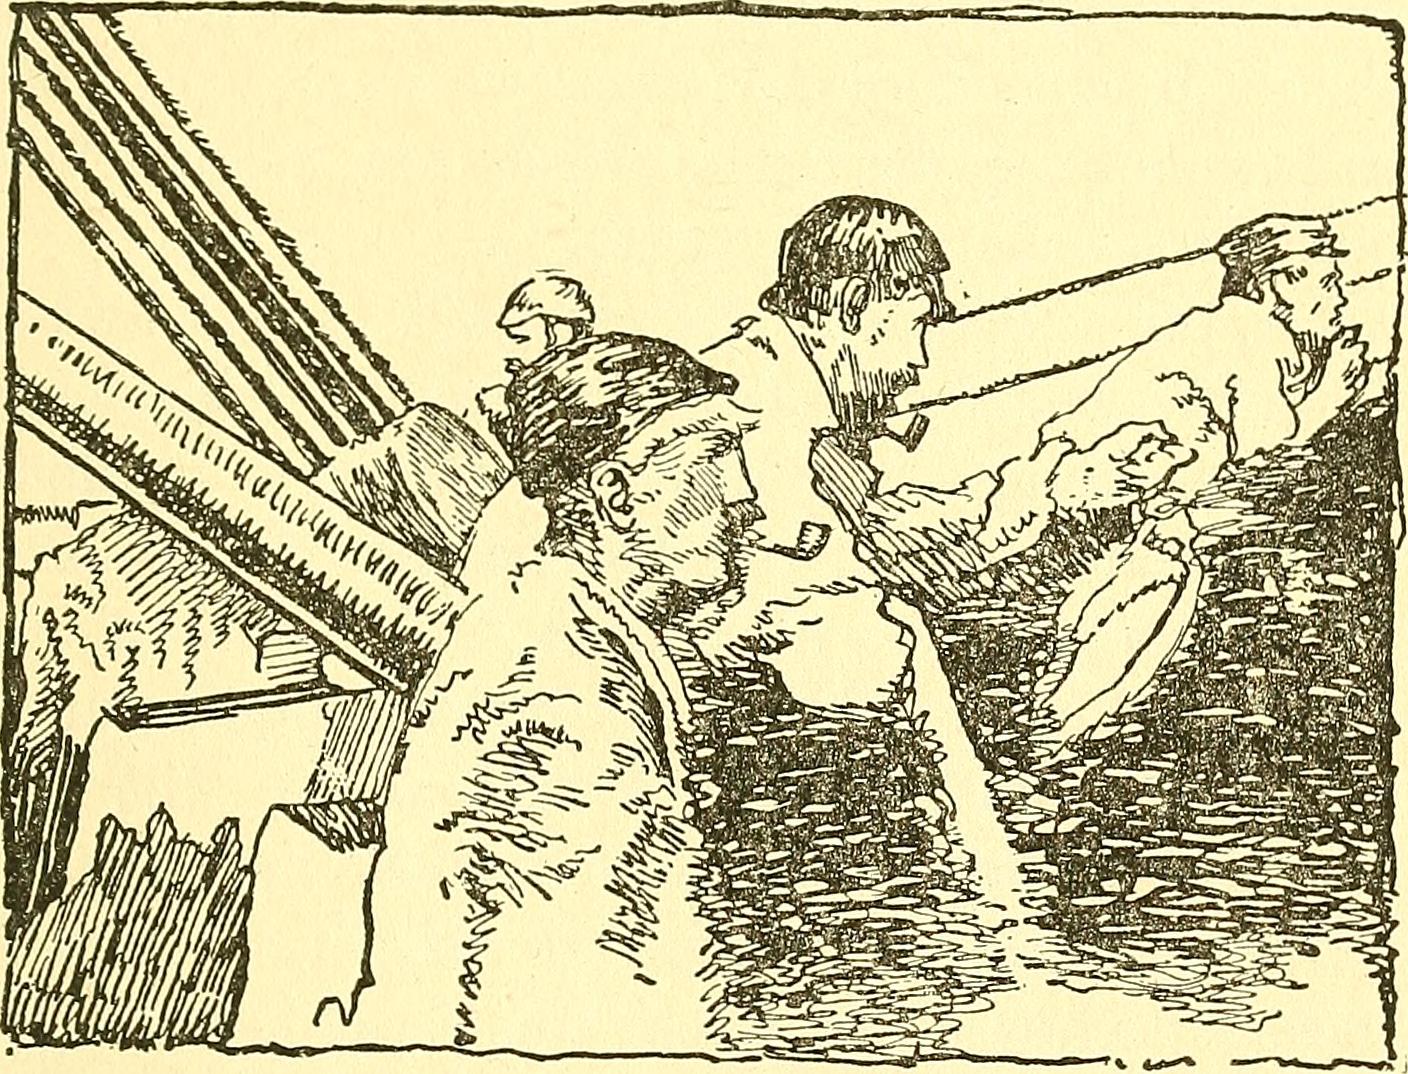 Image from page 250 of "Under sail" (1918)